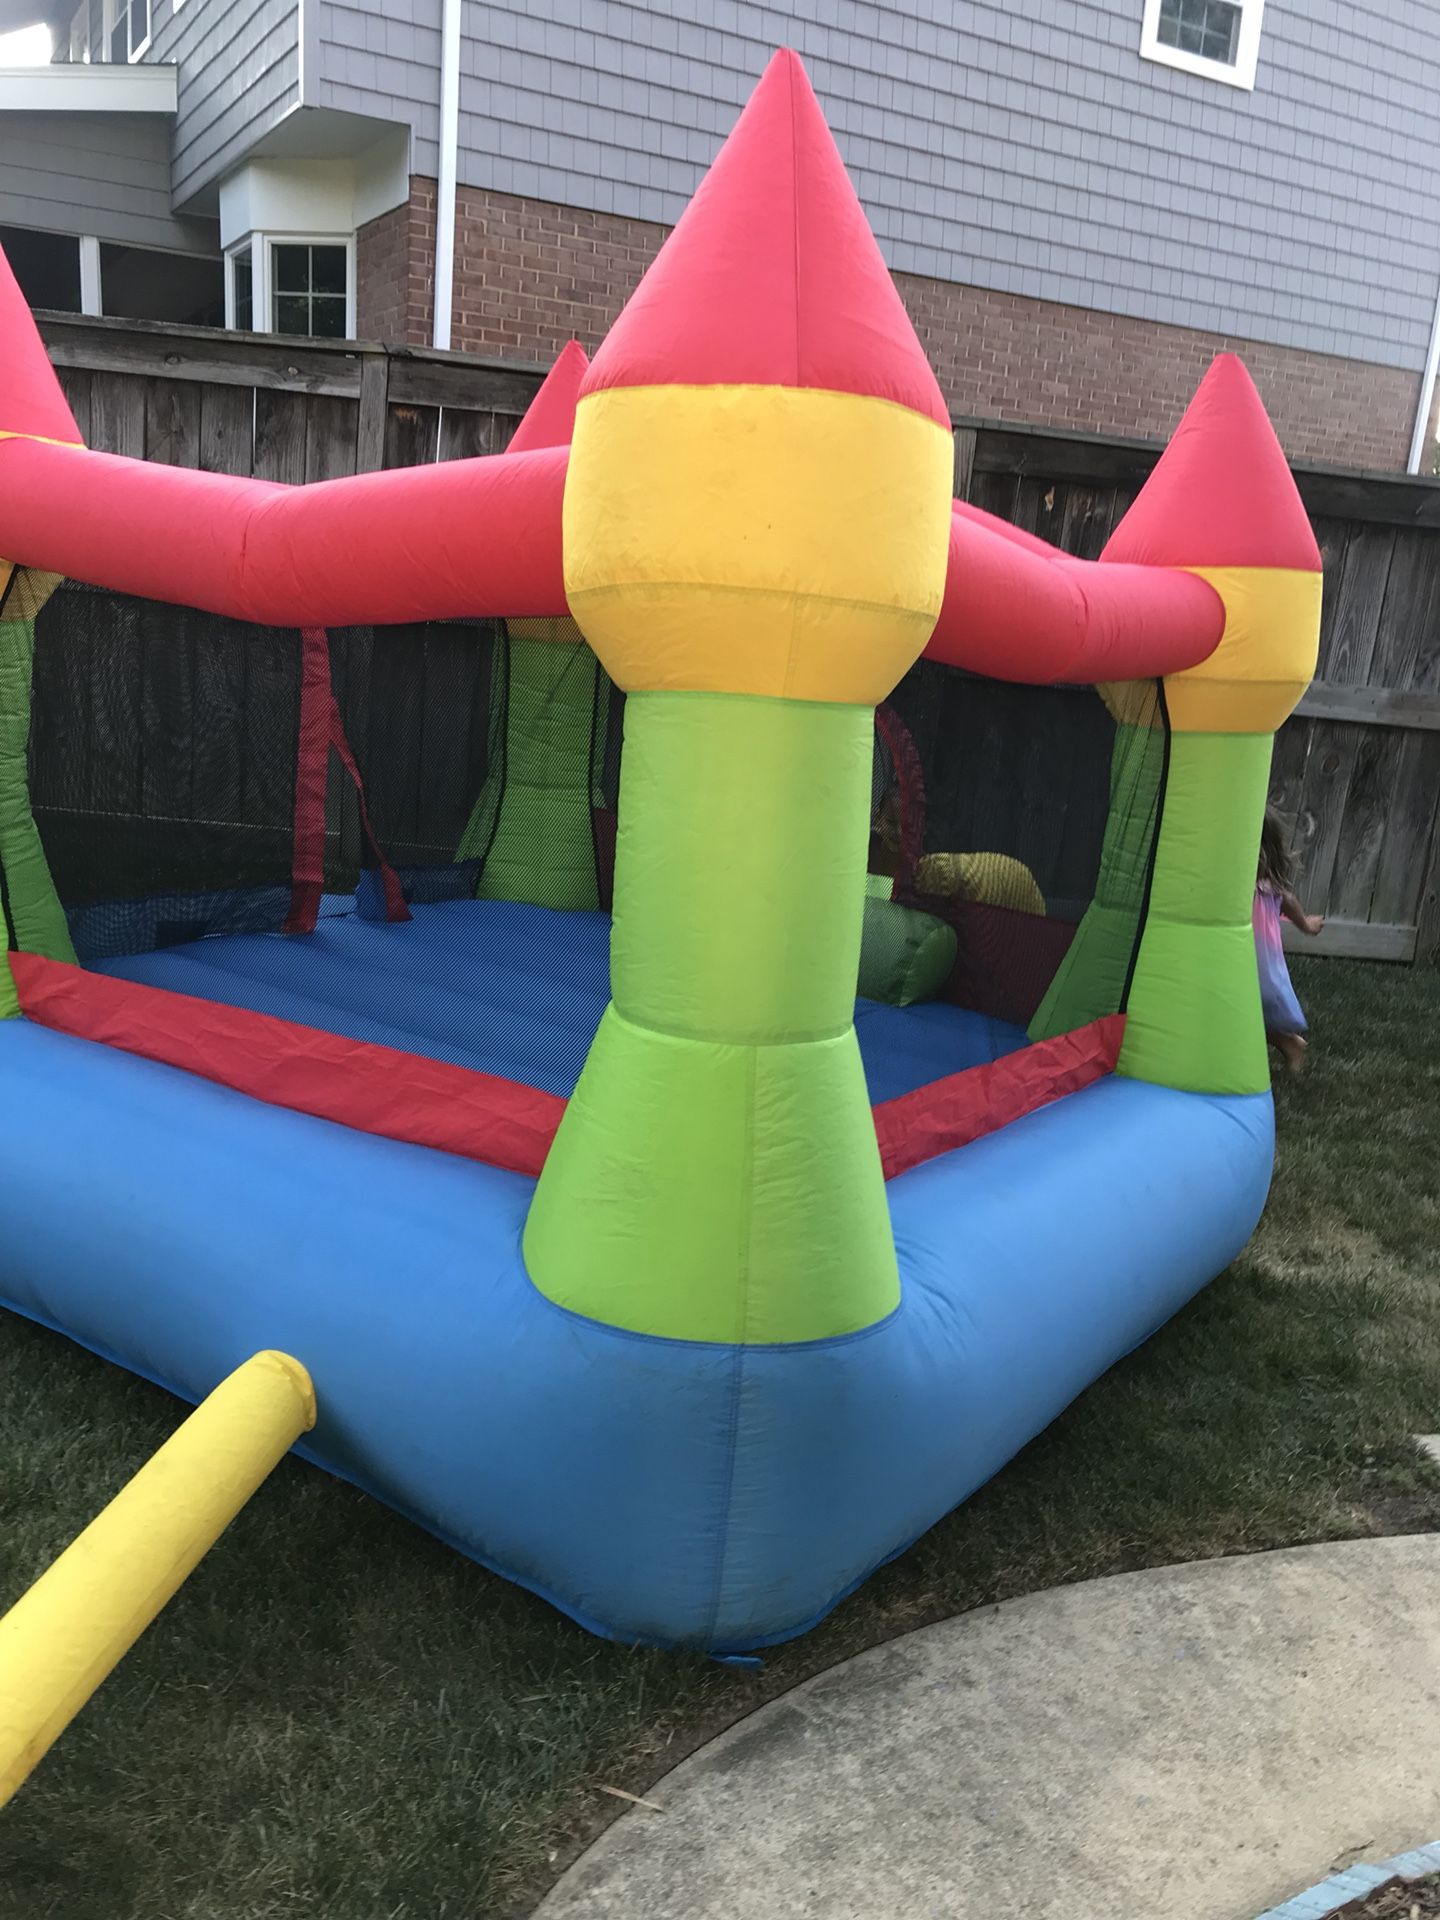 Jump bouncing house works for kids smaller than 5 (has some leaks that can be repaired)